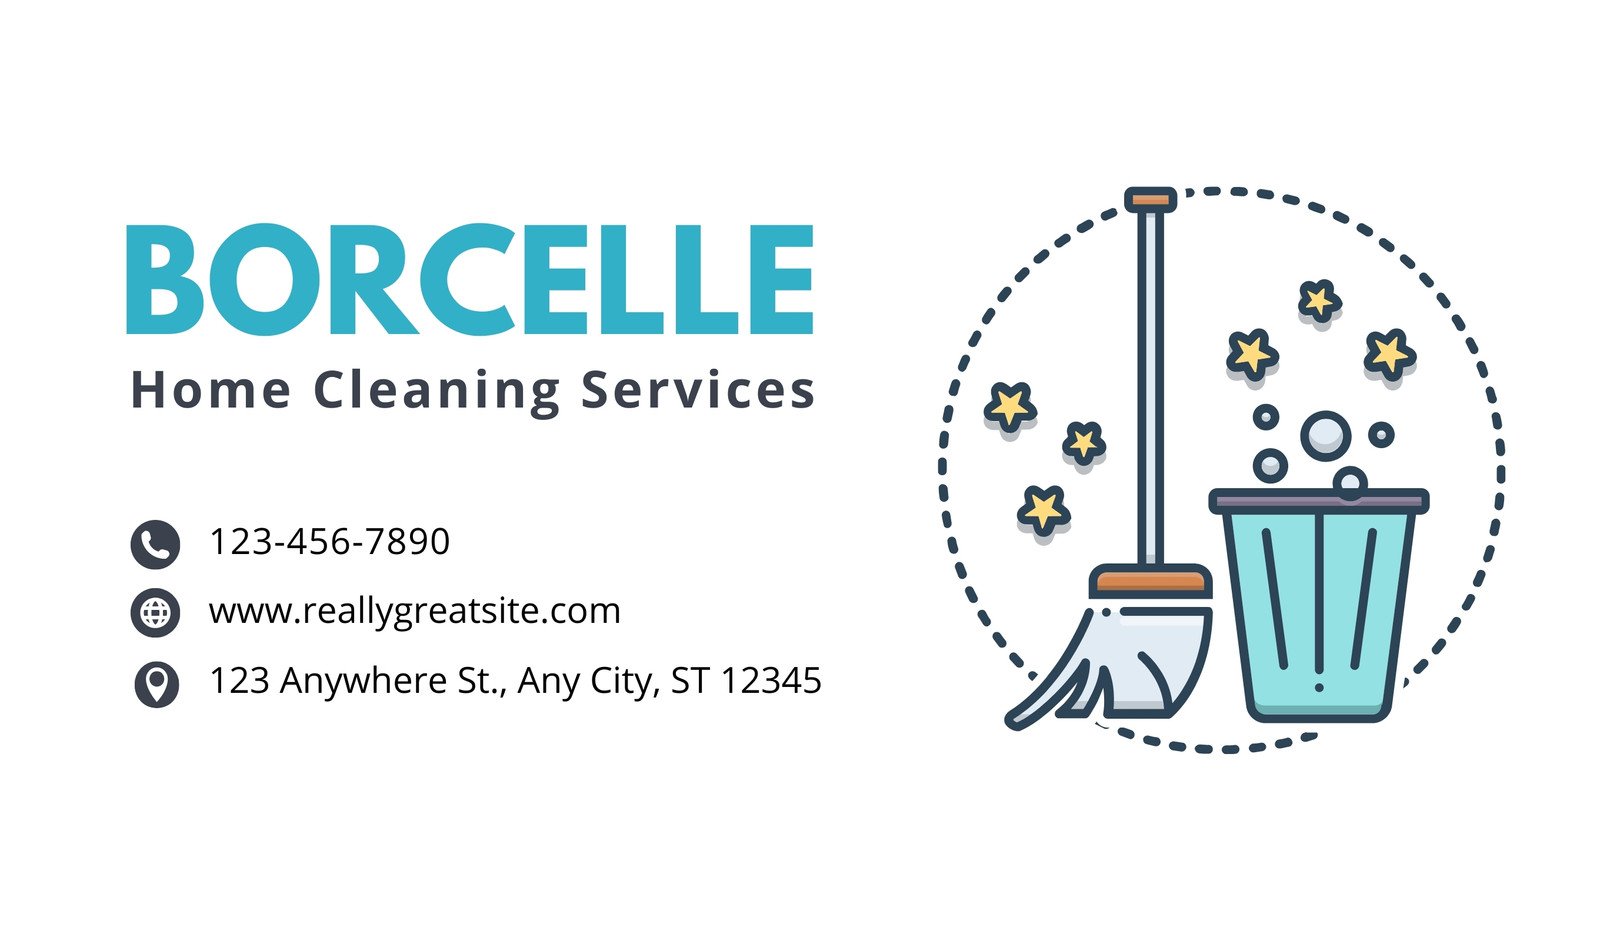 janitorial services business cards 1